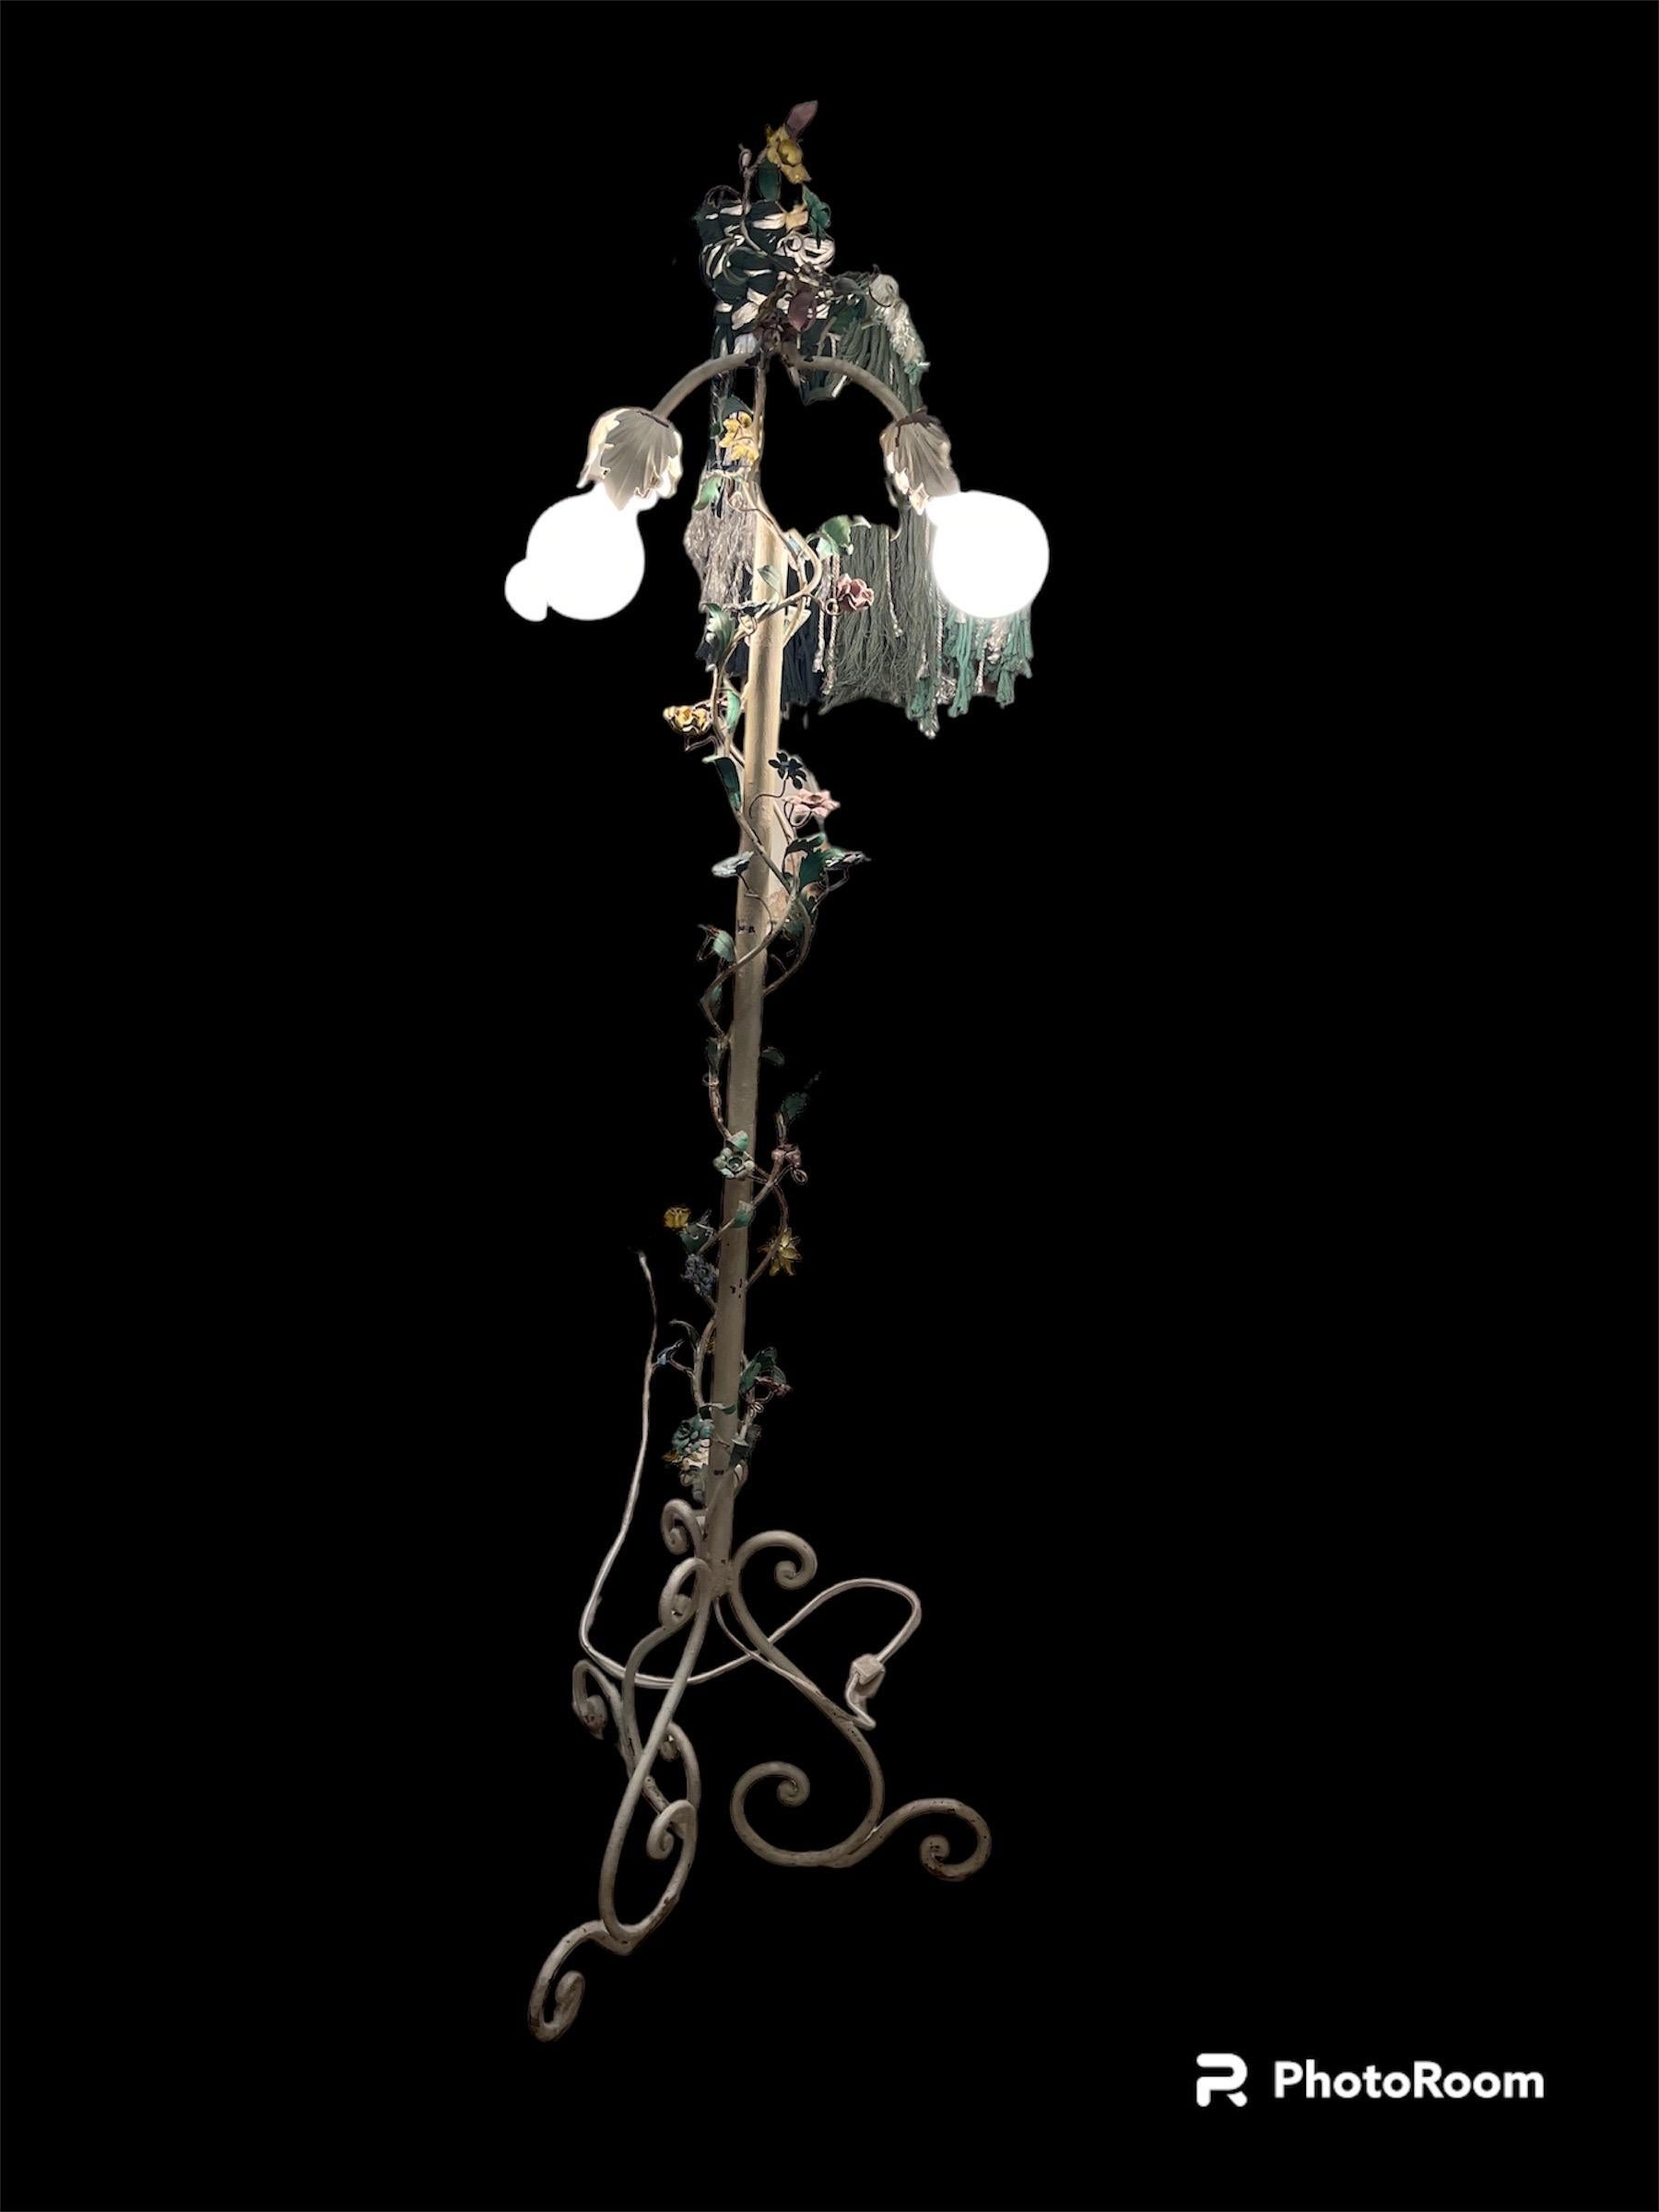 Floor lamp circa 1950's Italian painted tole two-light floor lamp with foliage and floral motif on the body.